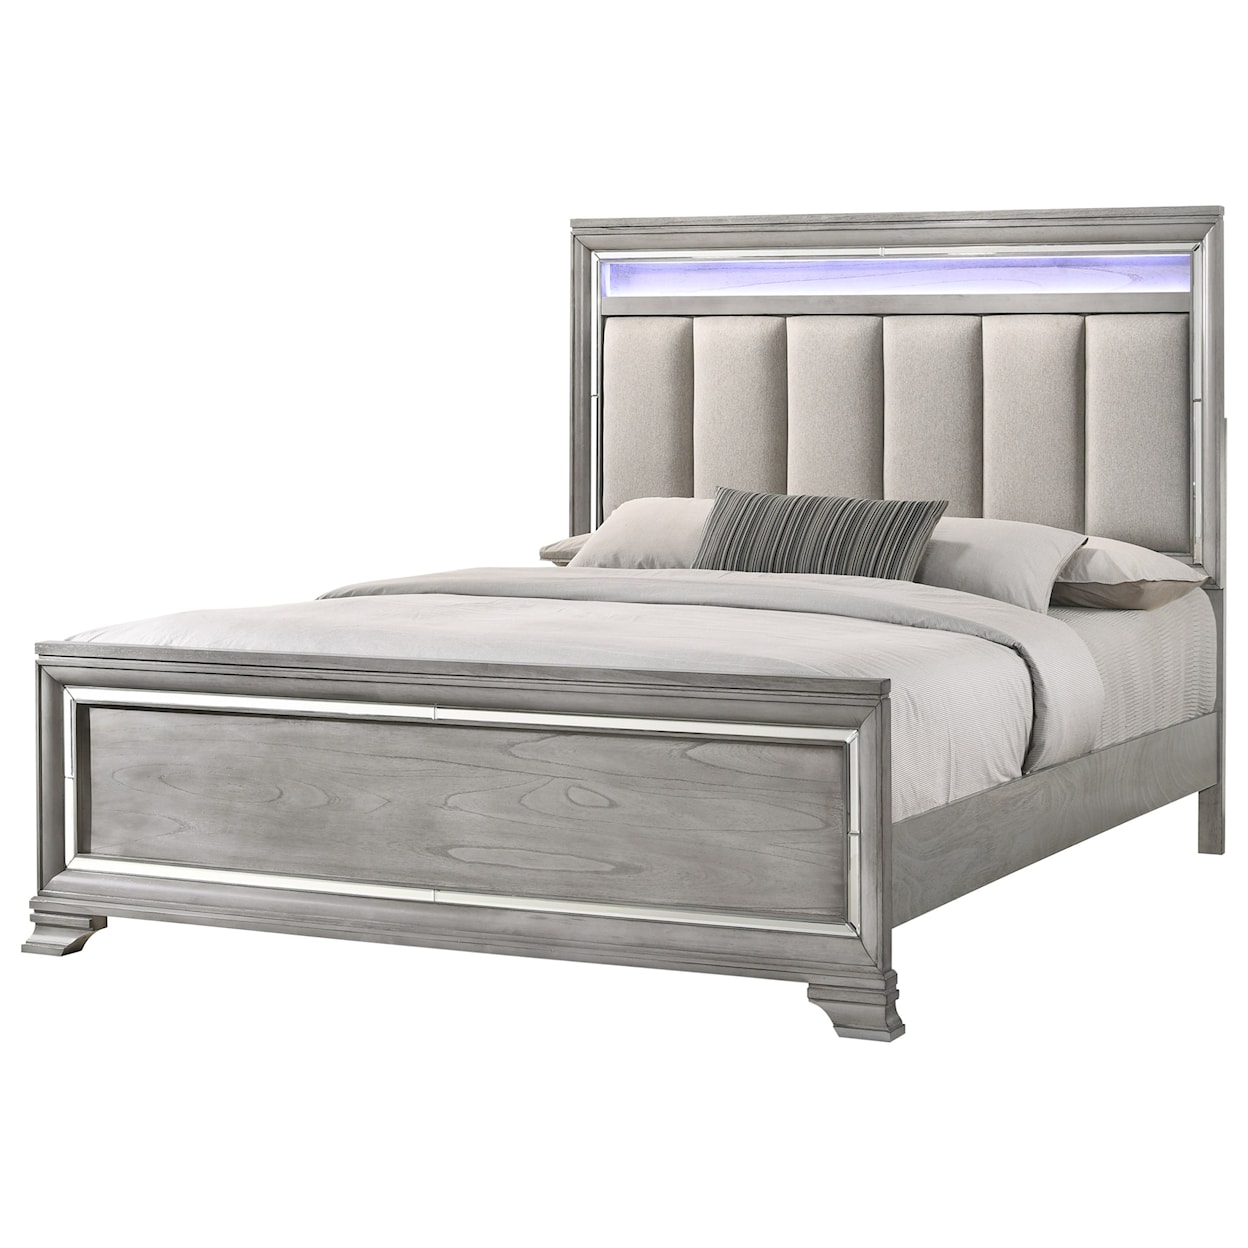 CM Vail California King Bed